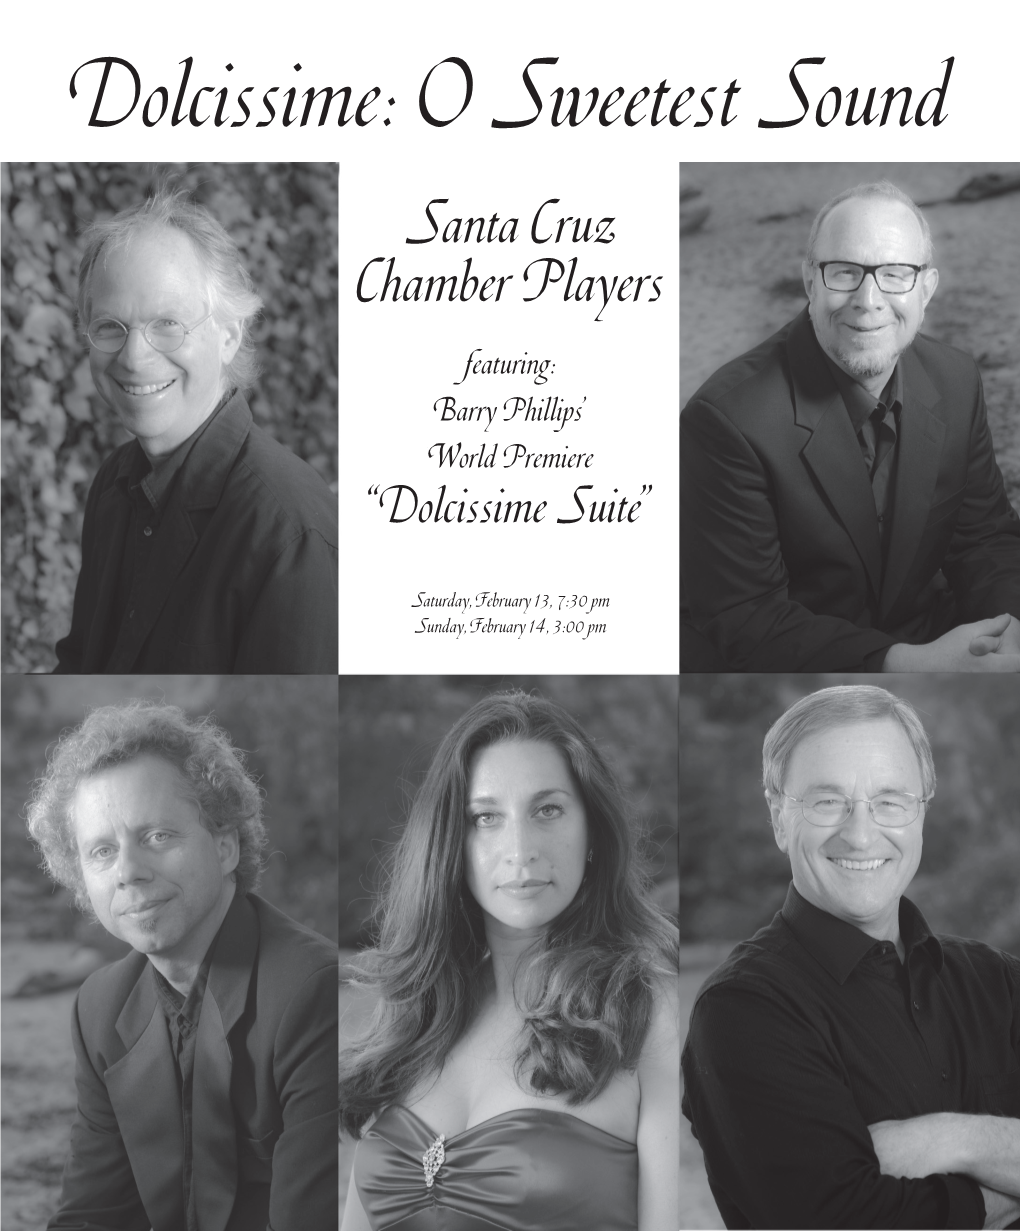 Dolcissime: O Sweetest Sound Santa Cruz Chamber Players Featuring: Barry Phillips’ World Premiere “Dolcissime Suite”